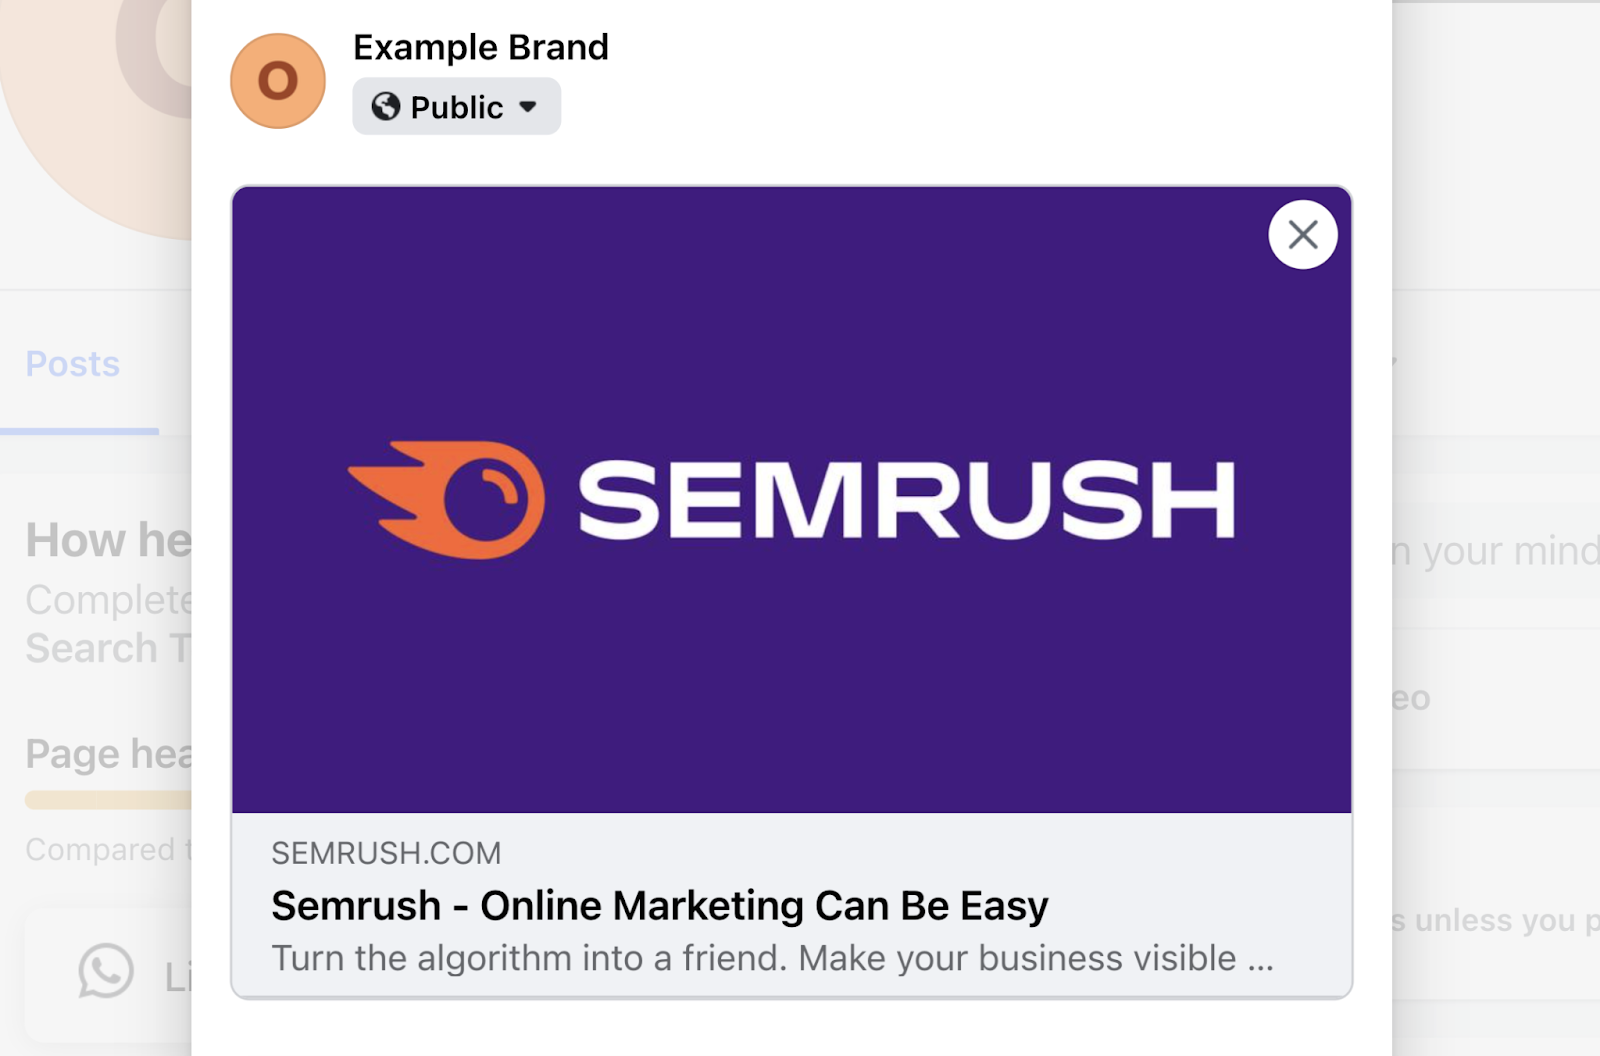 link autopopulates the facebook post with a Semrush logo image, title "Semrush - Online marketing can be easy," and a meta description